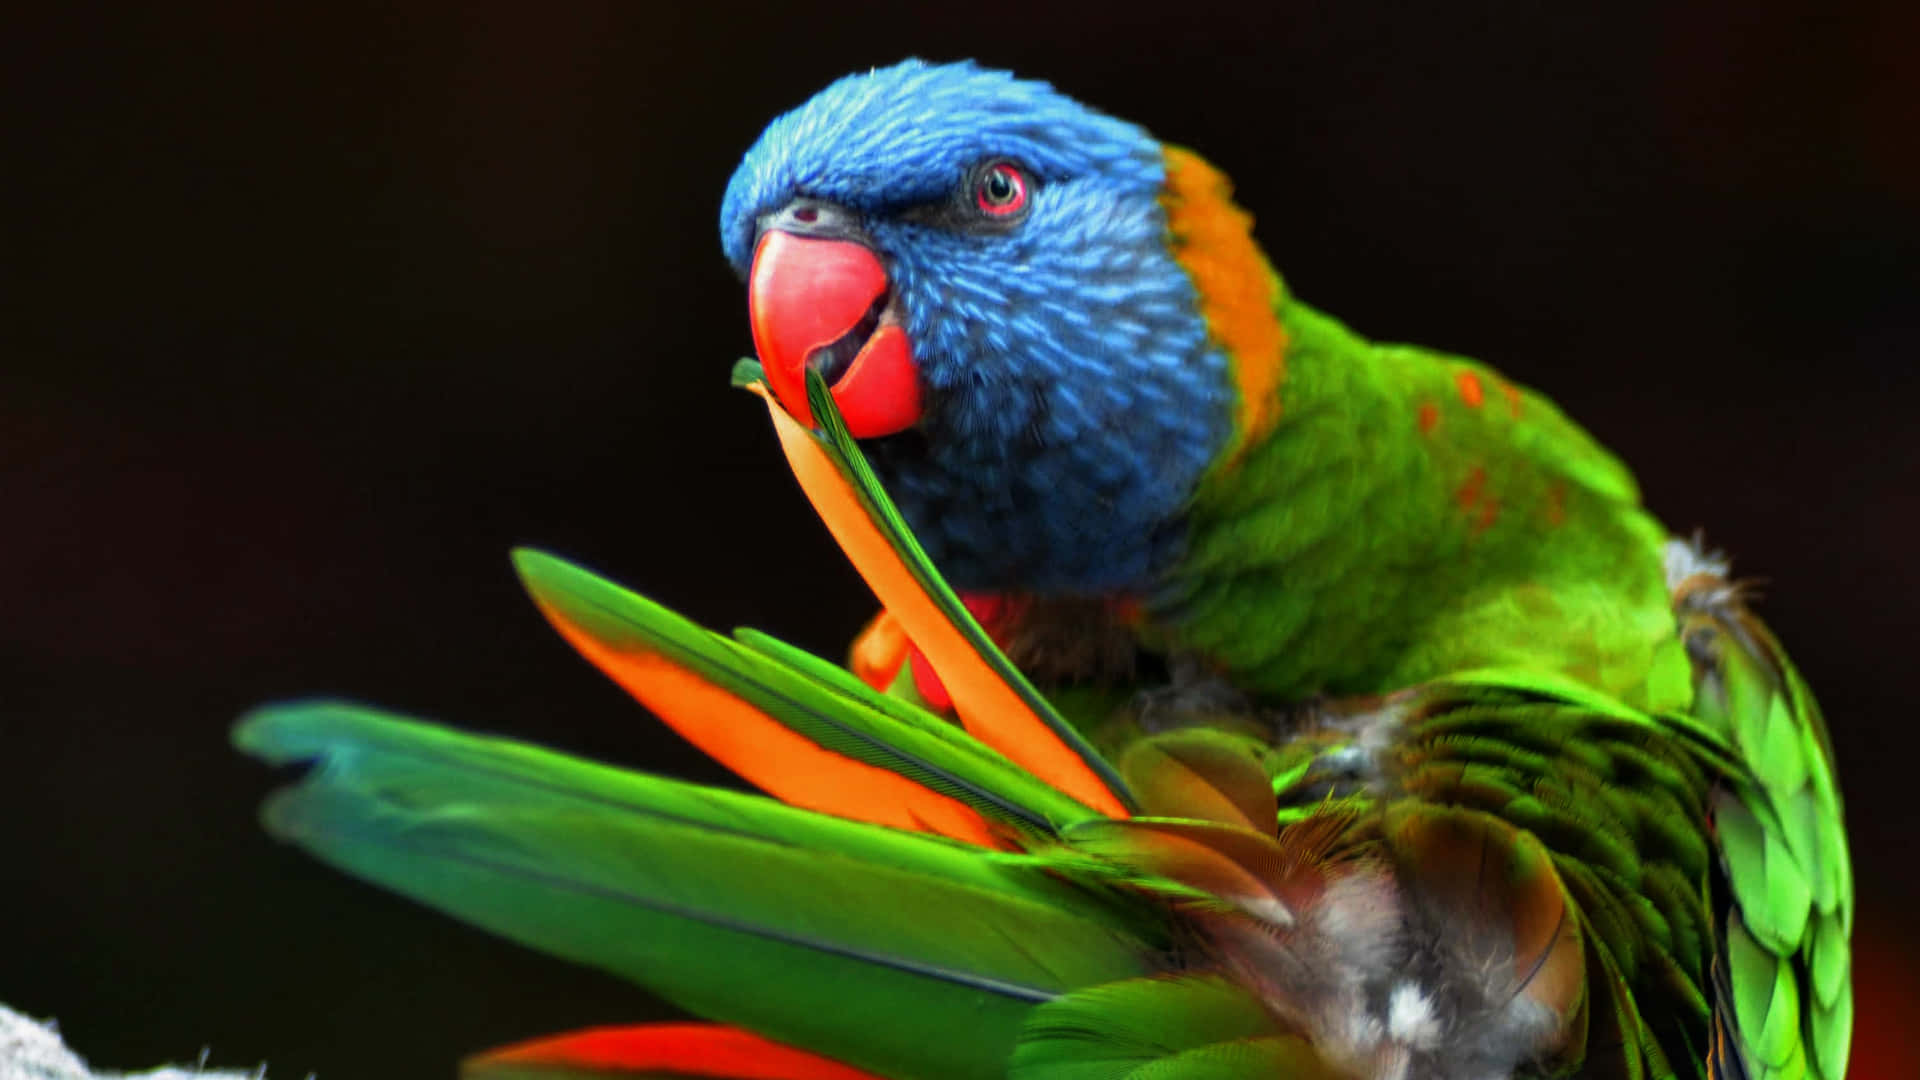 Parrot Cleaning Feathers Wallpaper